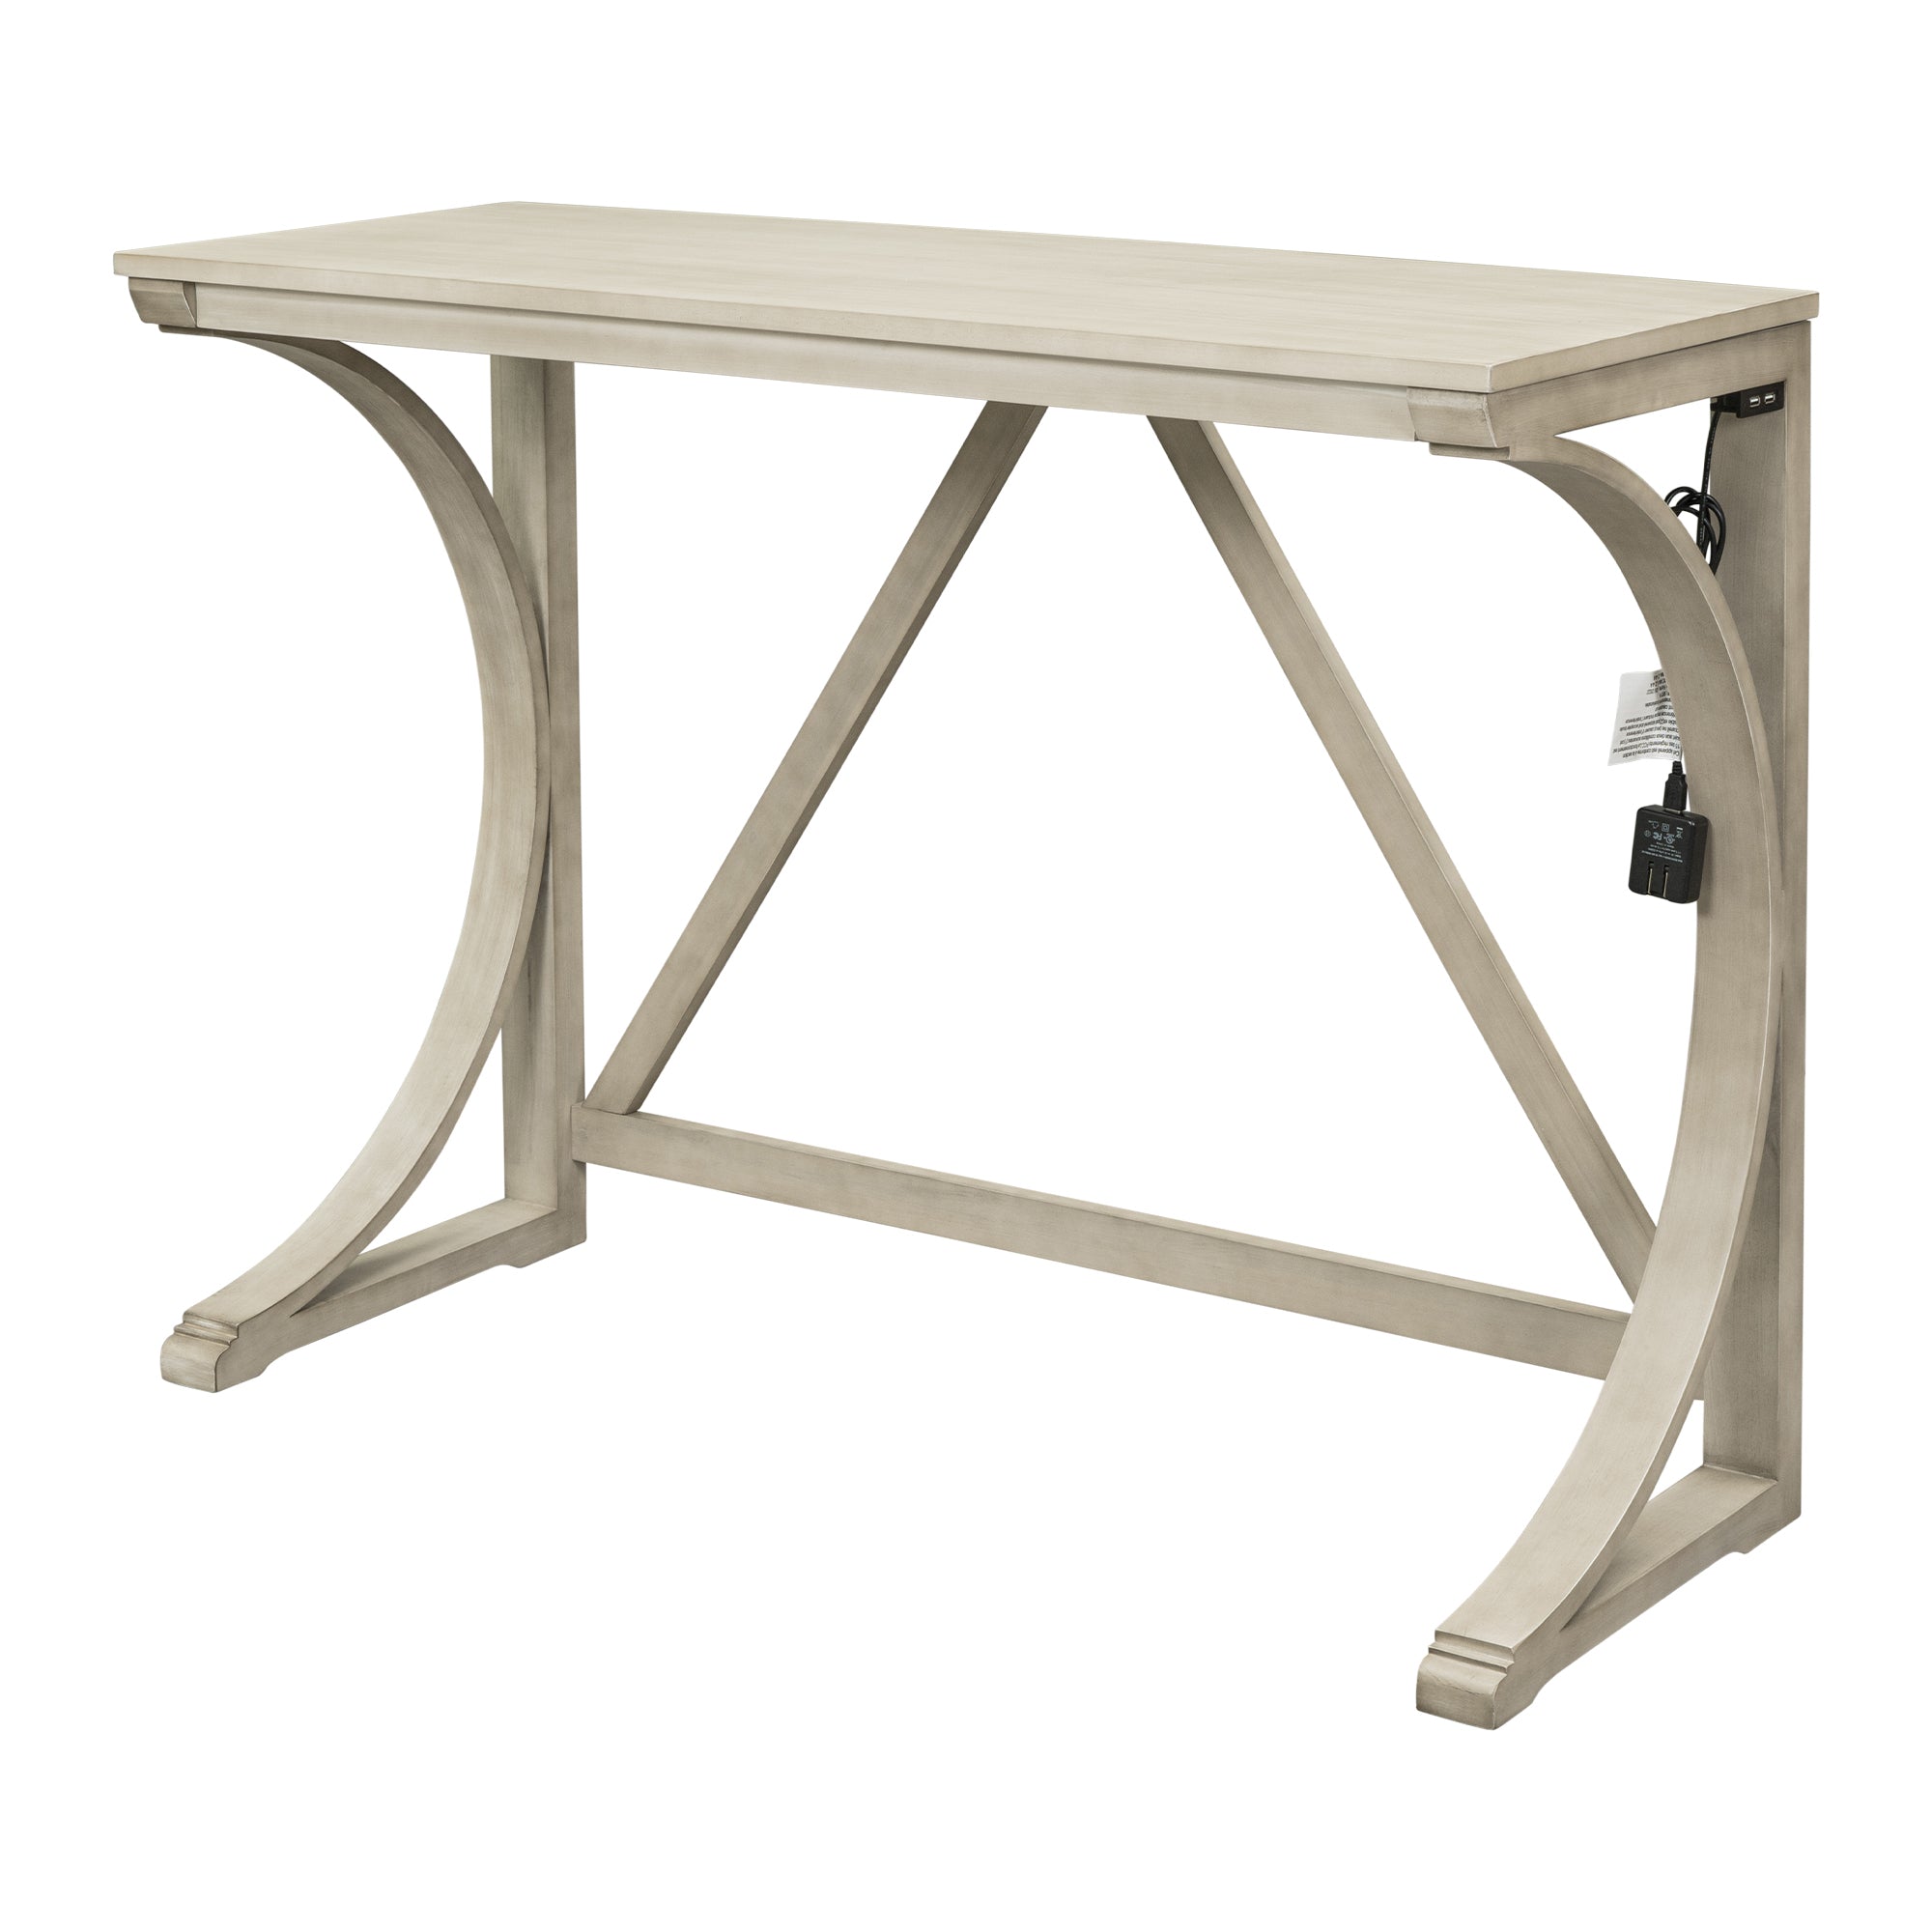 Farmhouse 3 Piece Counter Height Dining Table wood-wood-cream-seats 2-wood-dining room-solid